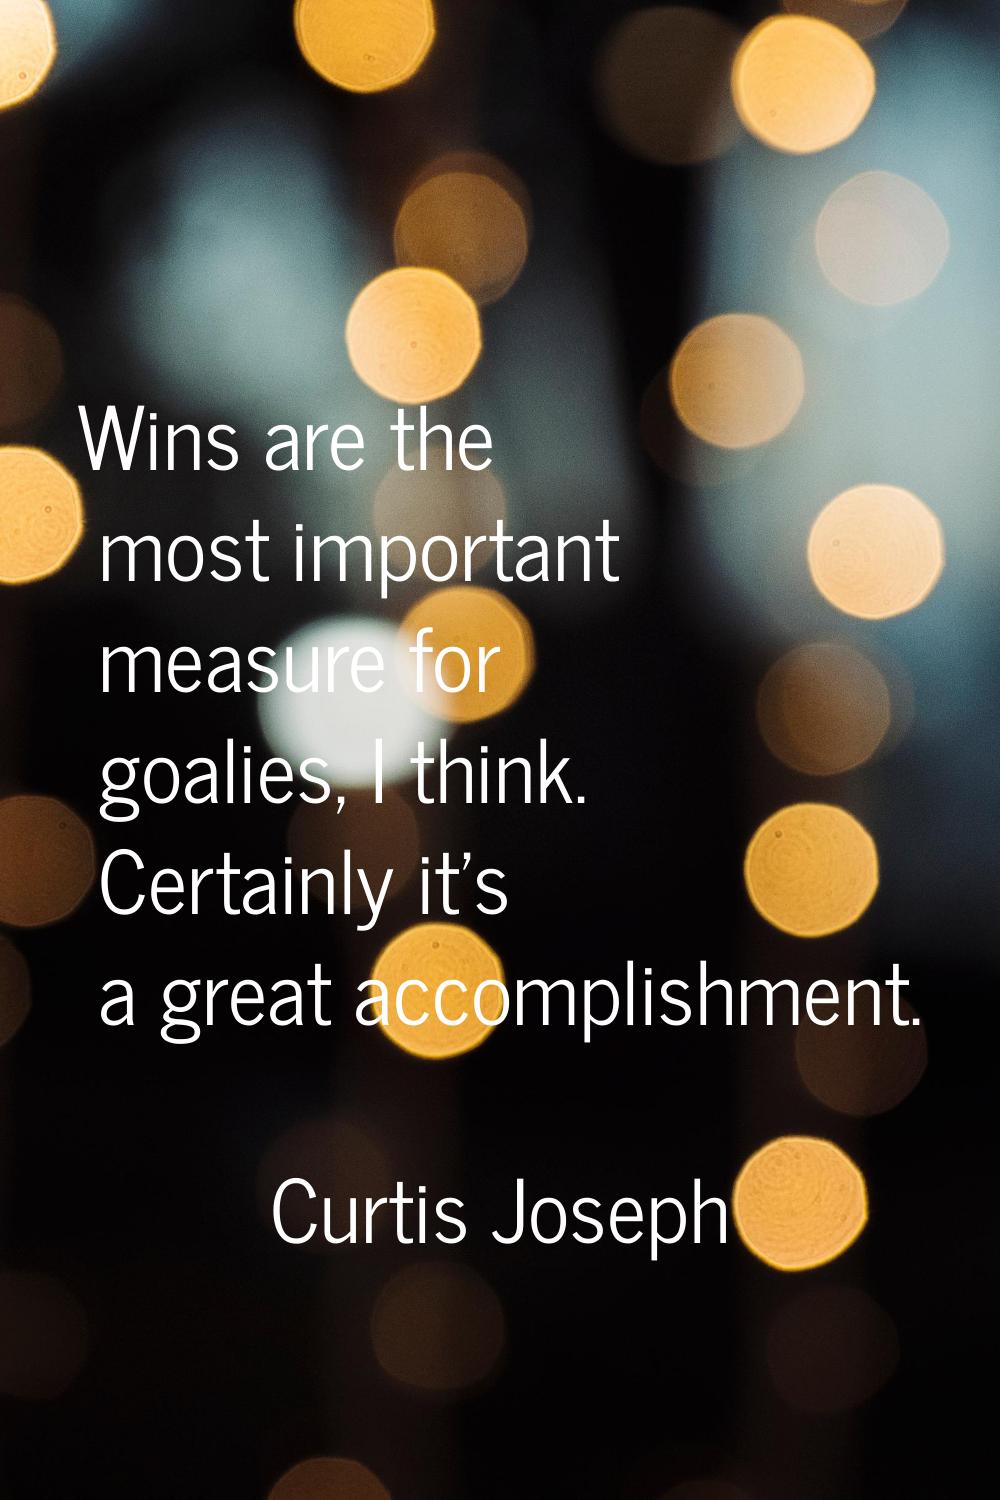 Wins are the most important measure for goalies, I think. Certainly it's a great accomplishment.